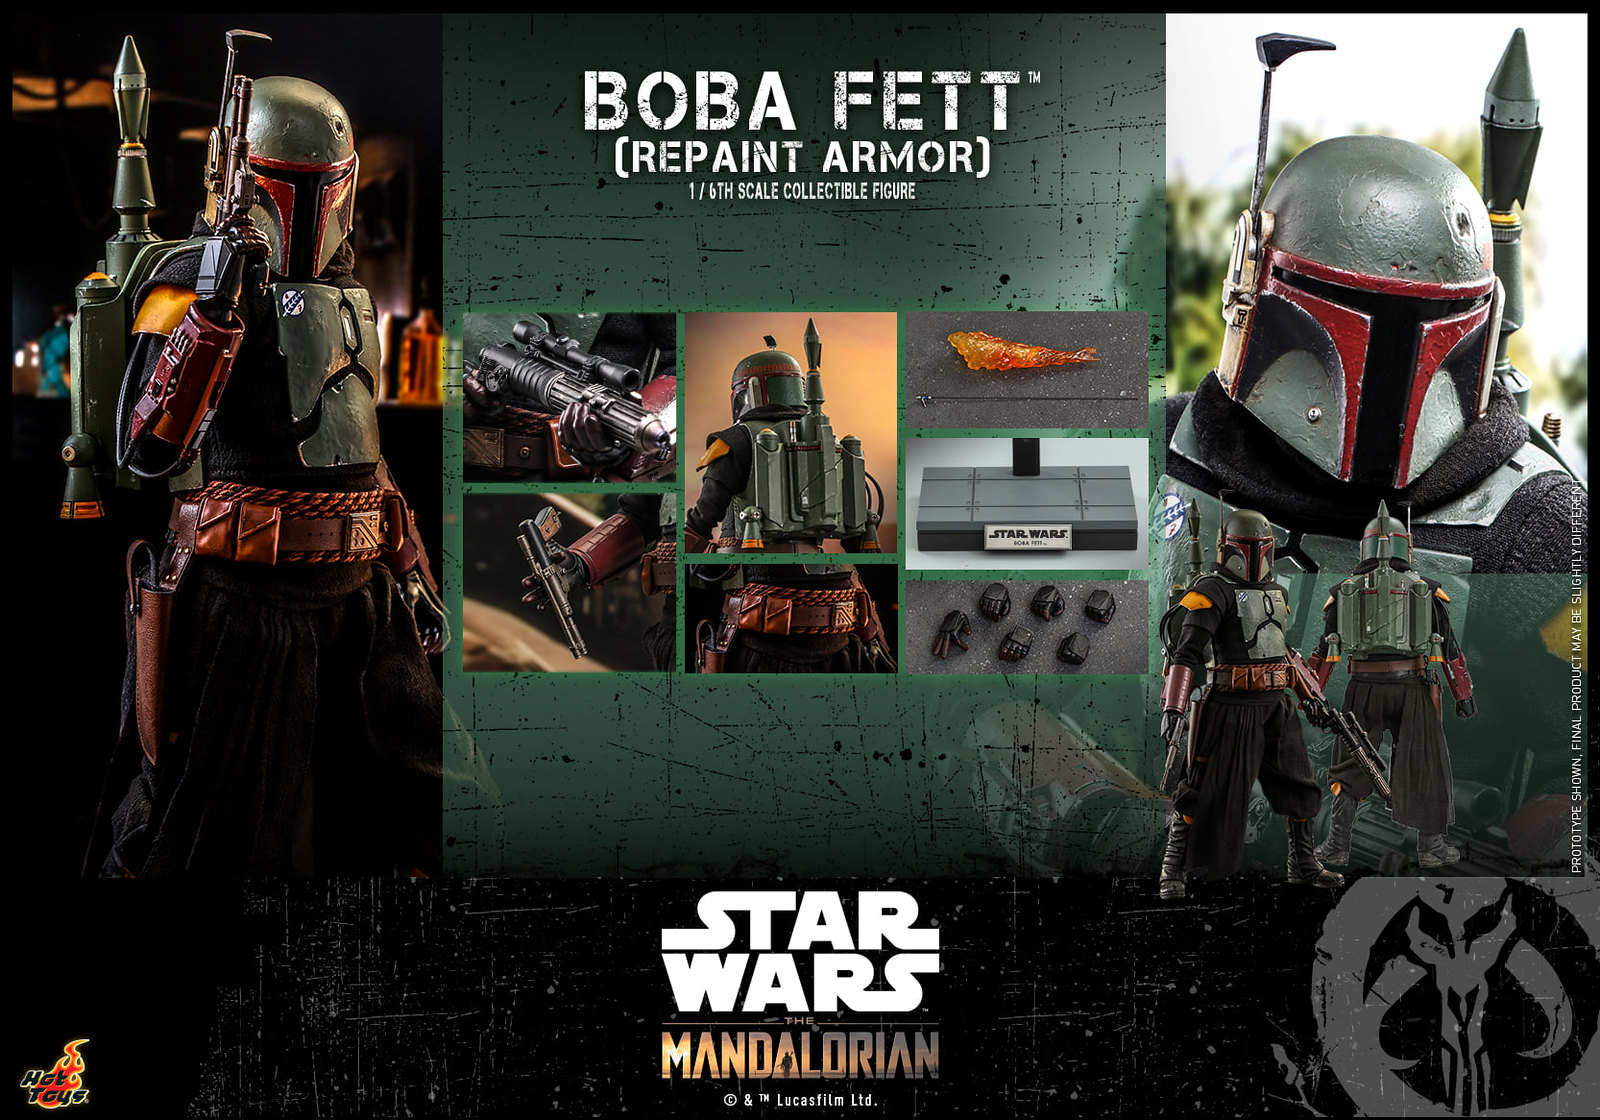 Star Wars: The Mandalorian™ - 1/6th scale Boba Fett™ (Repaint Armor) Collectible figure/ figure and Throne Collectible Set 51310543187_0d22b7660a_h